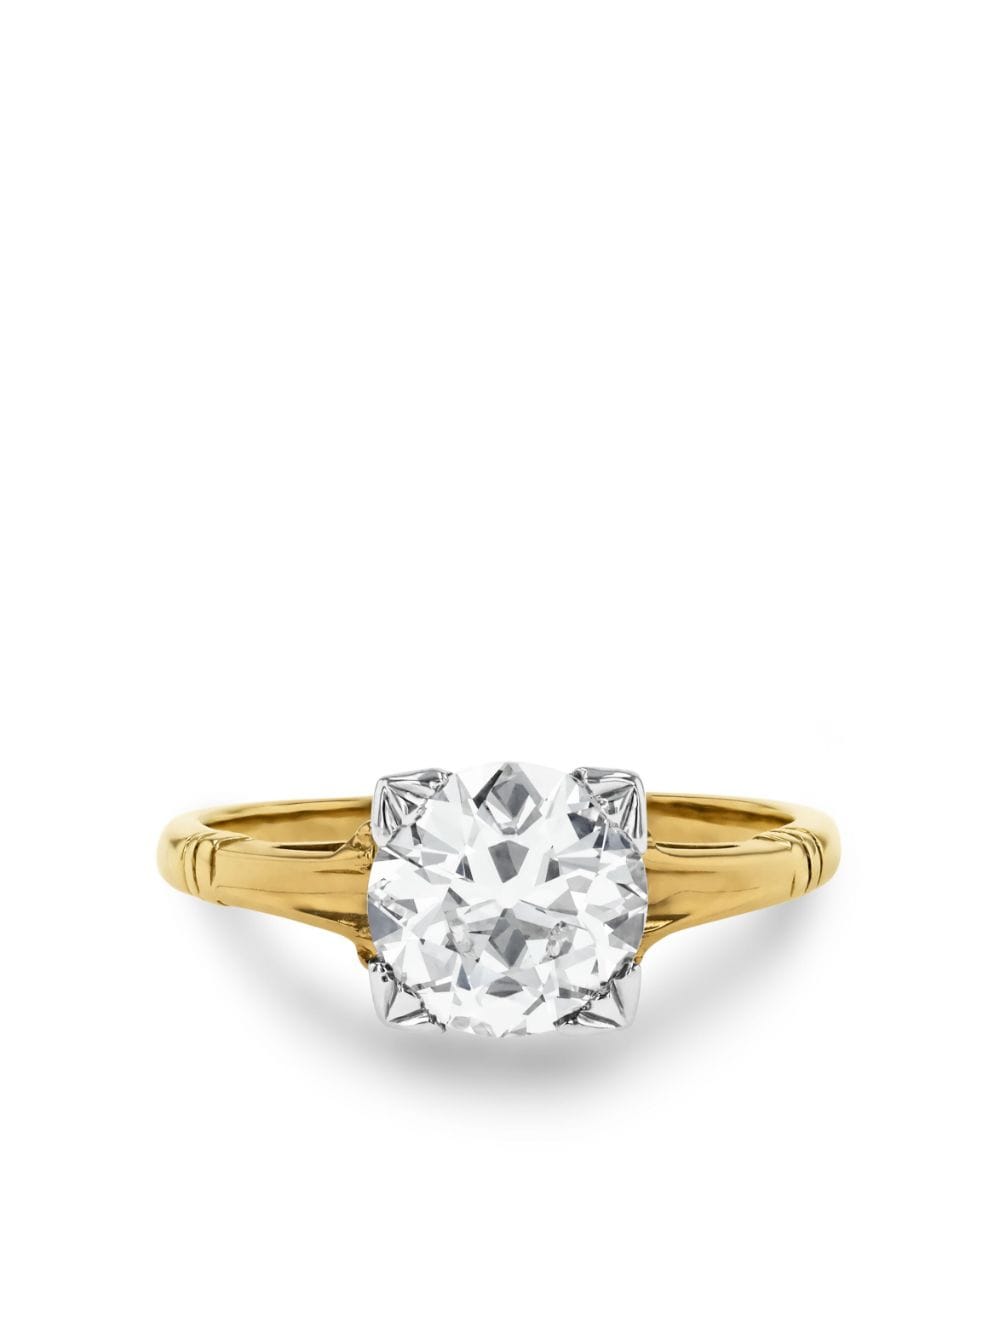 Pragnell Vintage 14kt yellow gold Solitaire diamond ring